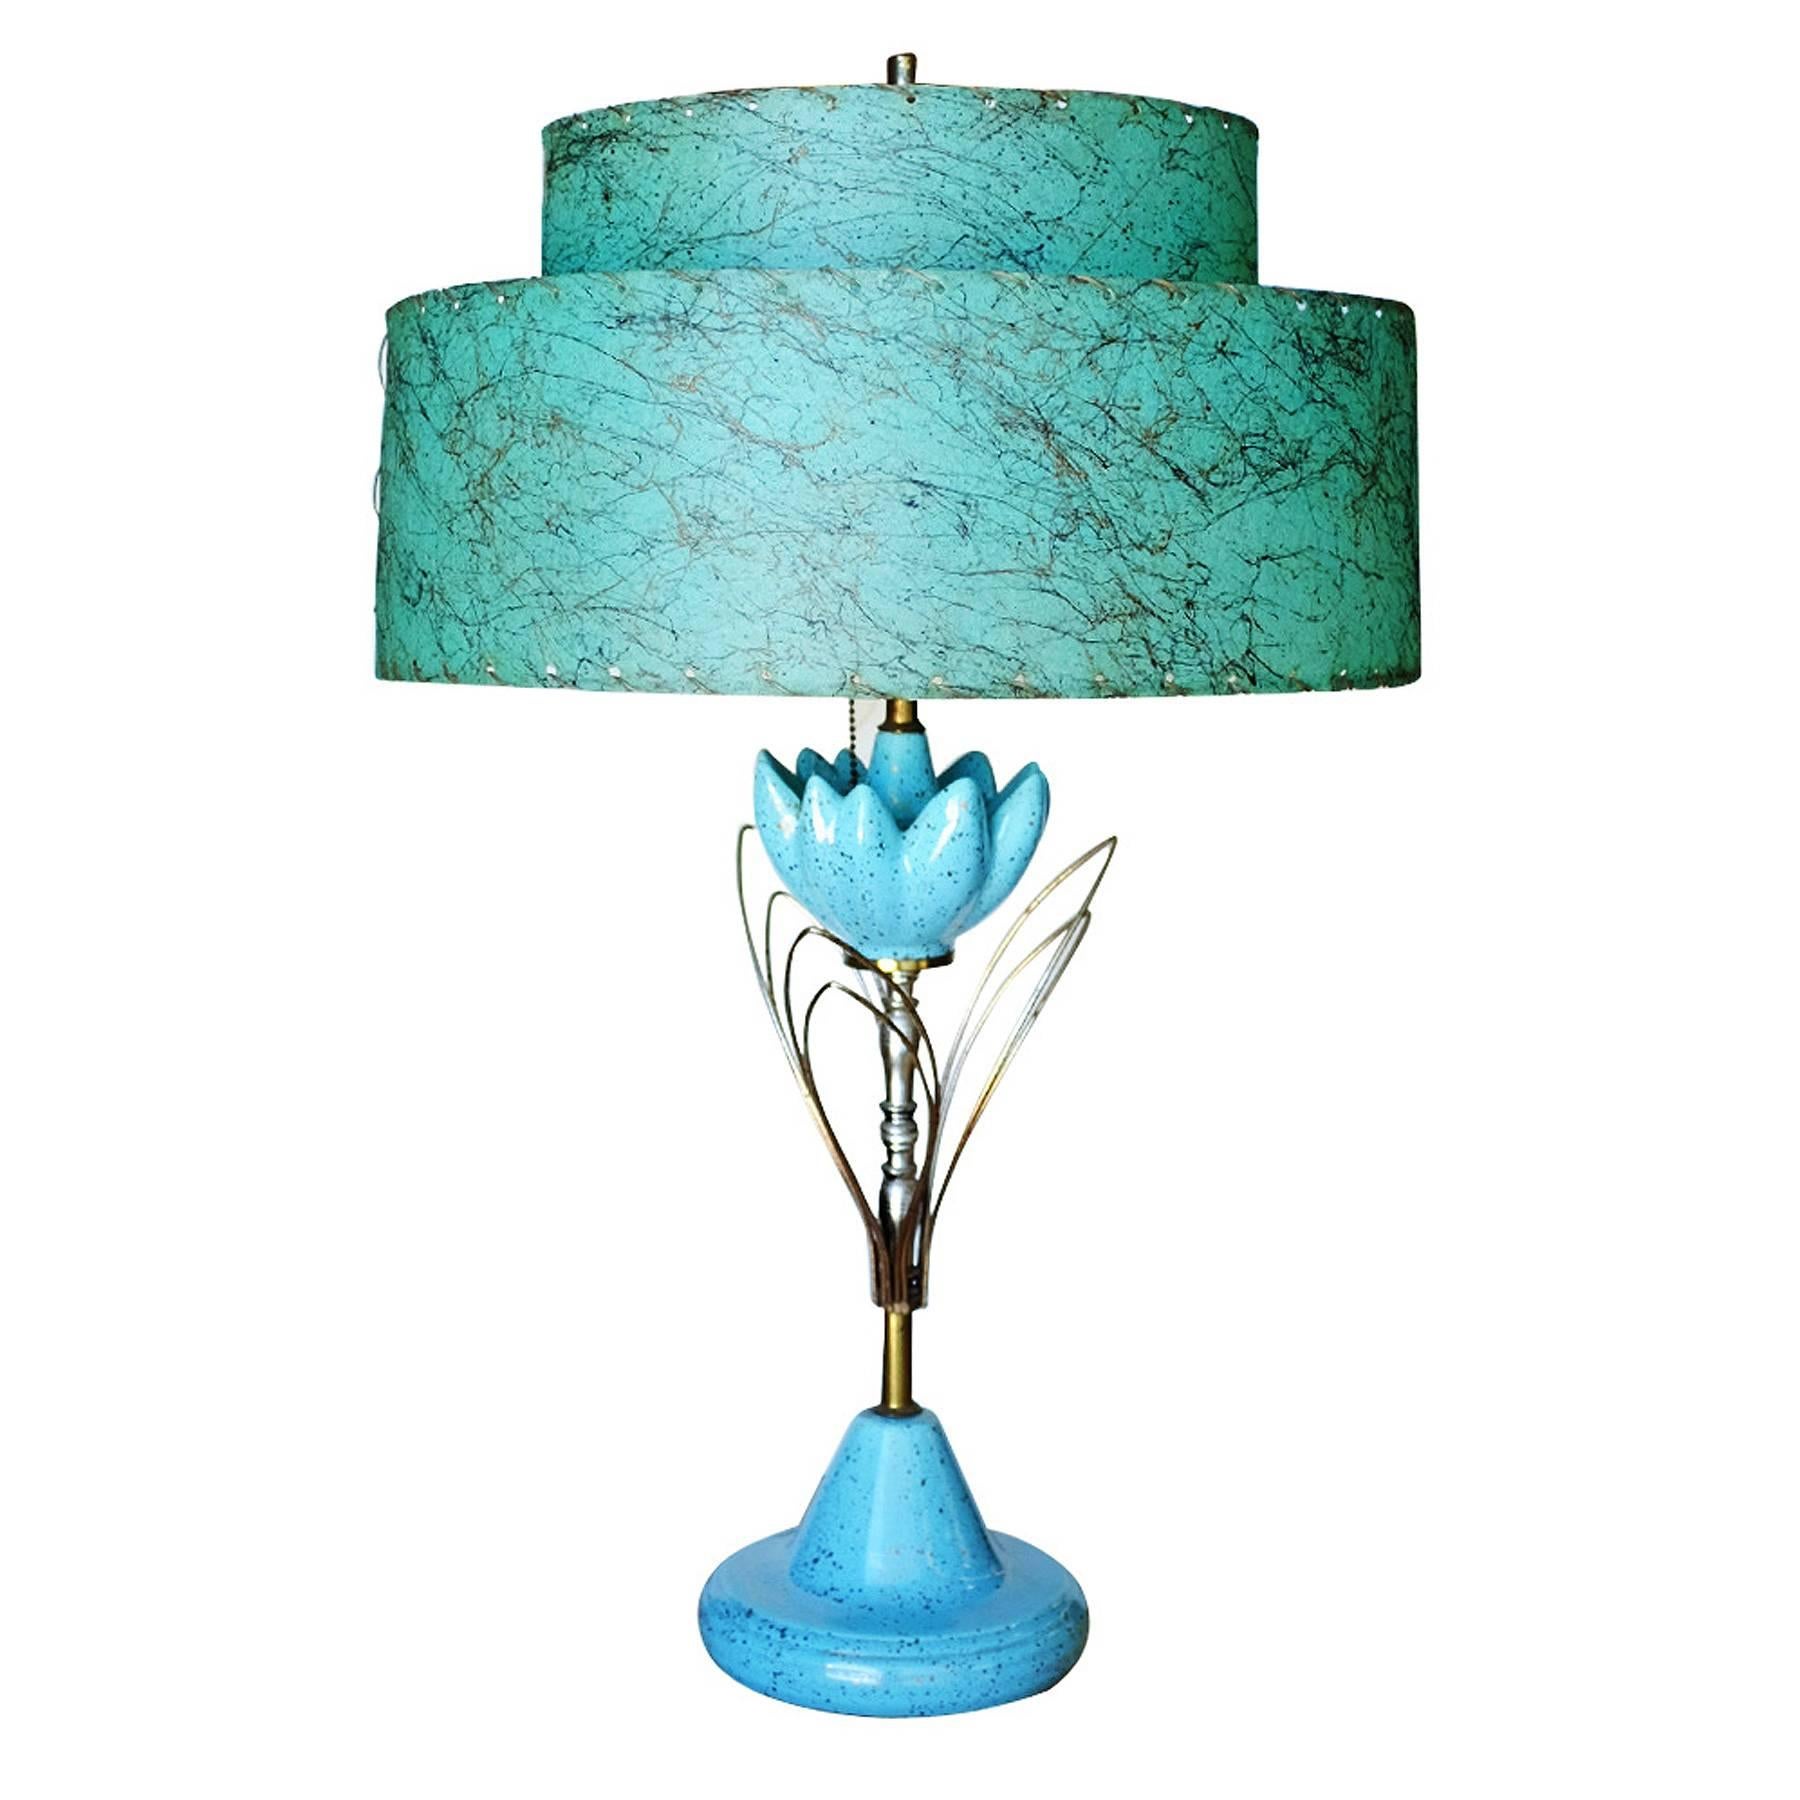 Vintage Mid-Century ceramic sculptural lotus table lamp with original fiberglass whip-stitch shade.

This unique lamp features a ceramic base with a brass stem that branches out to abstract leaves and a ceramic cluster of flower pedals and crowned